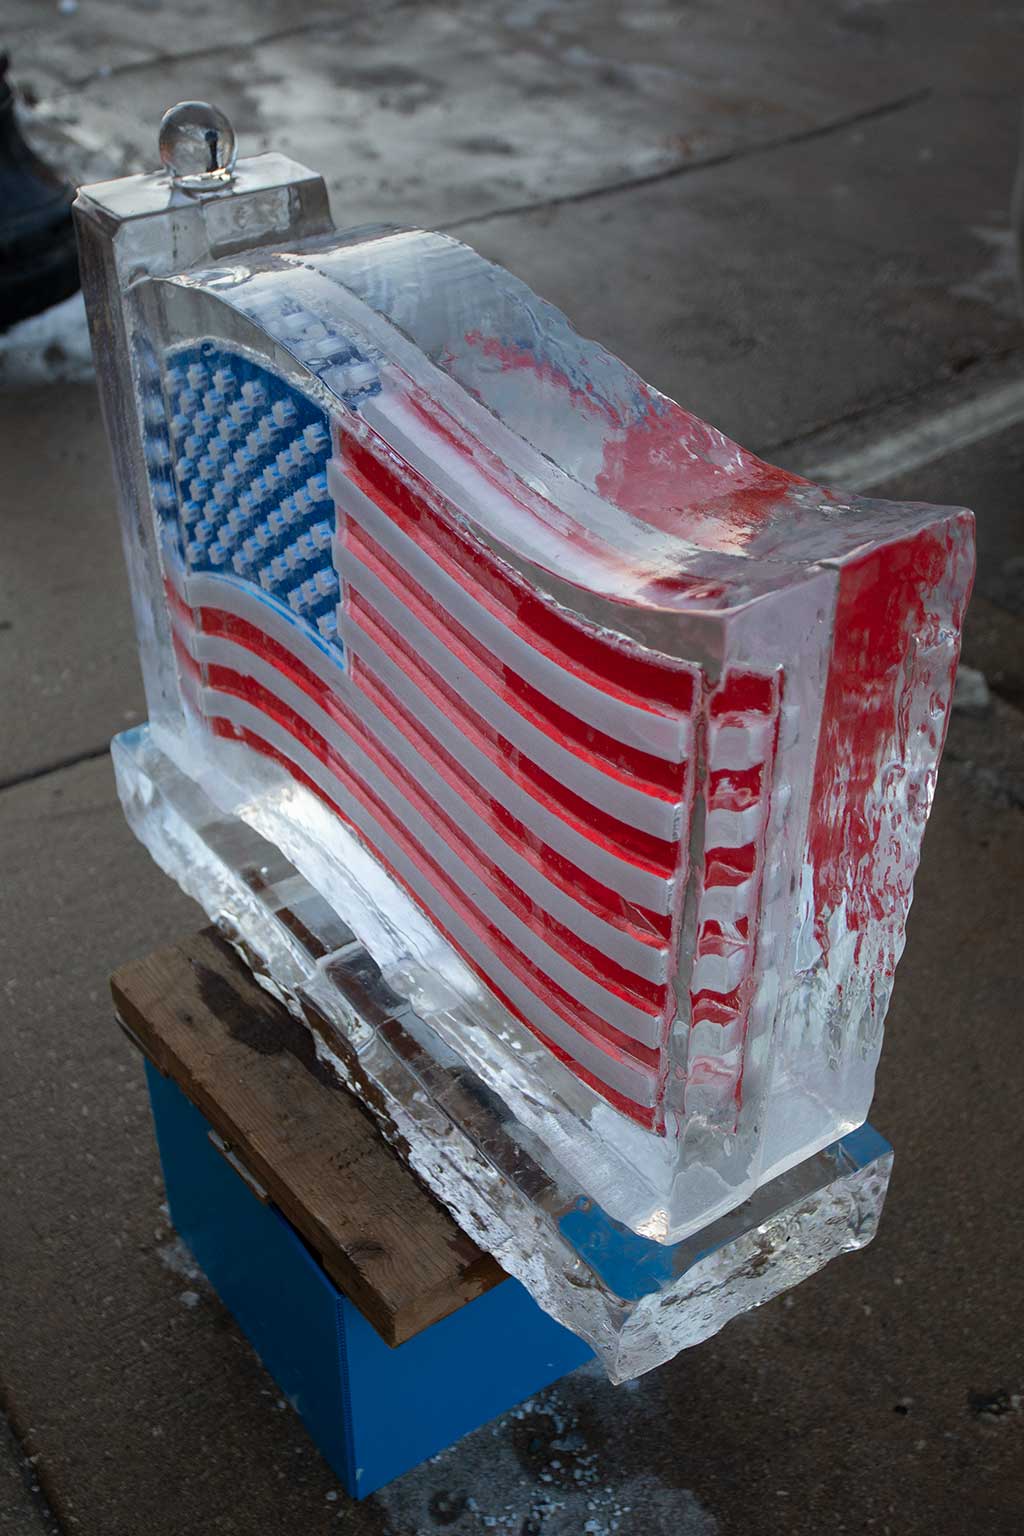 drive-swim-fly-downers-grove-chicago-illinois-ice-sculpture-downtown-businesses-american-flag